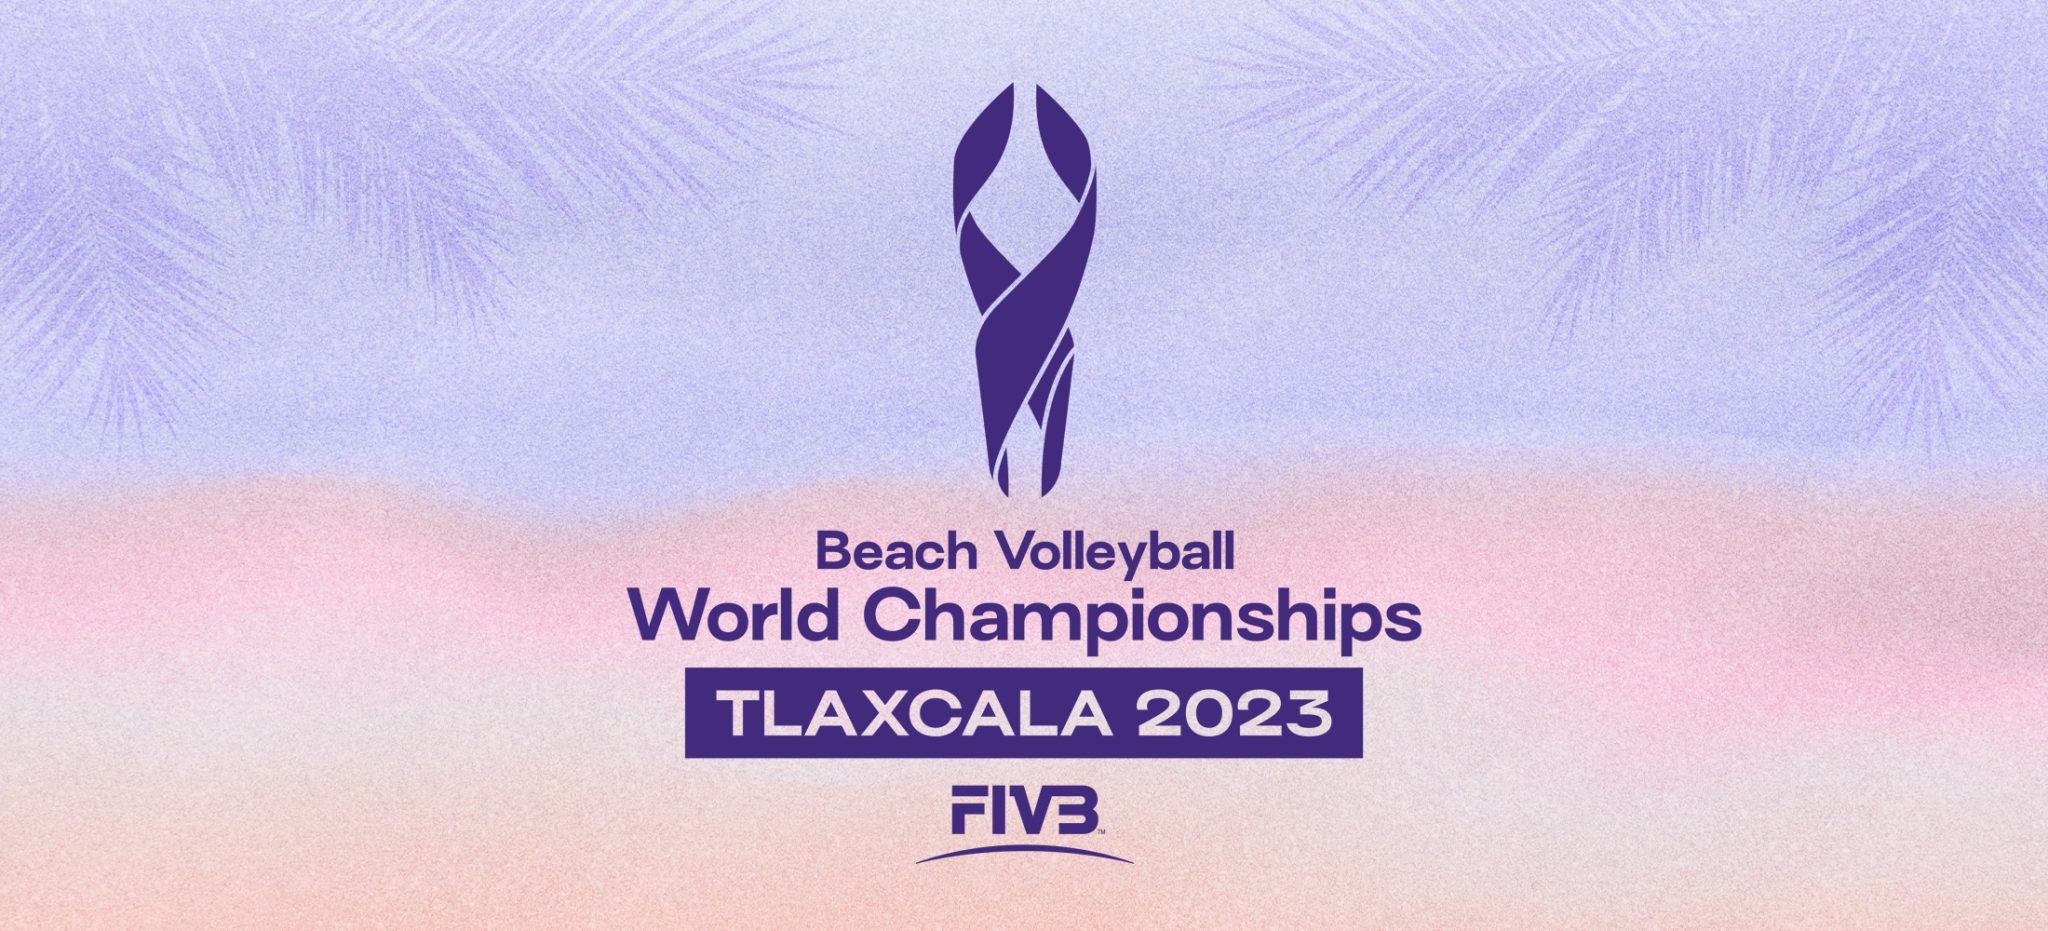 AVC Qualification System To the 2023 FIVB Beach Volleyball World